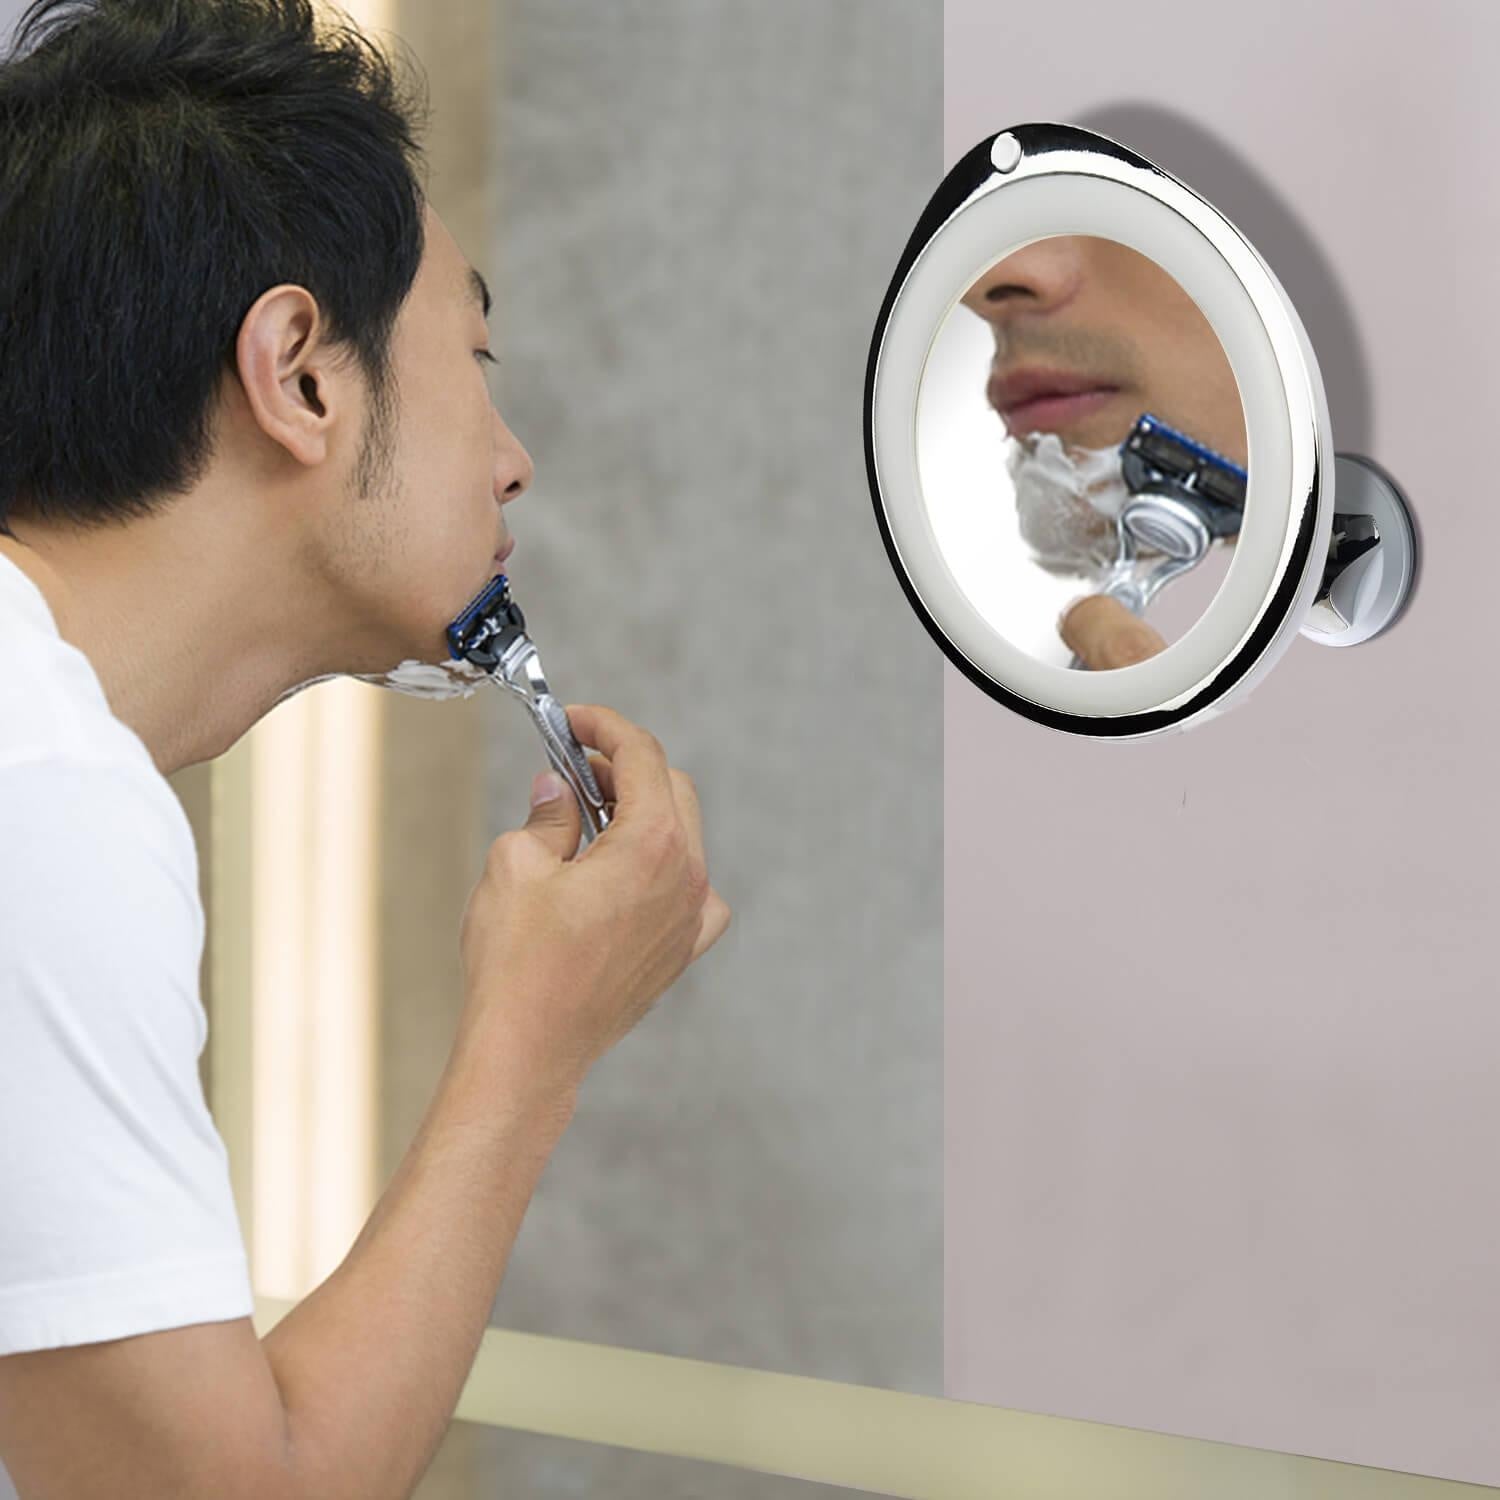 10x Magnifying Makeup Vanity Cosmetic Beauty Bathroom Mirror with LED Light Deals499